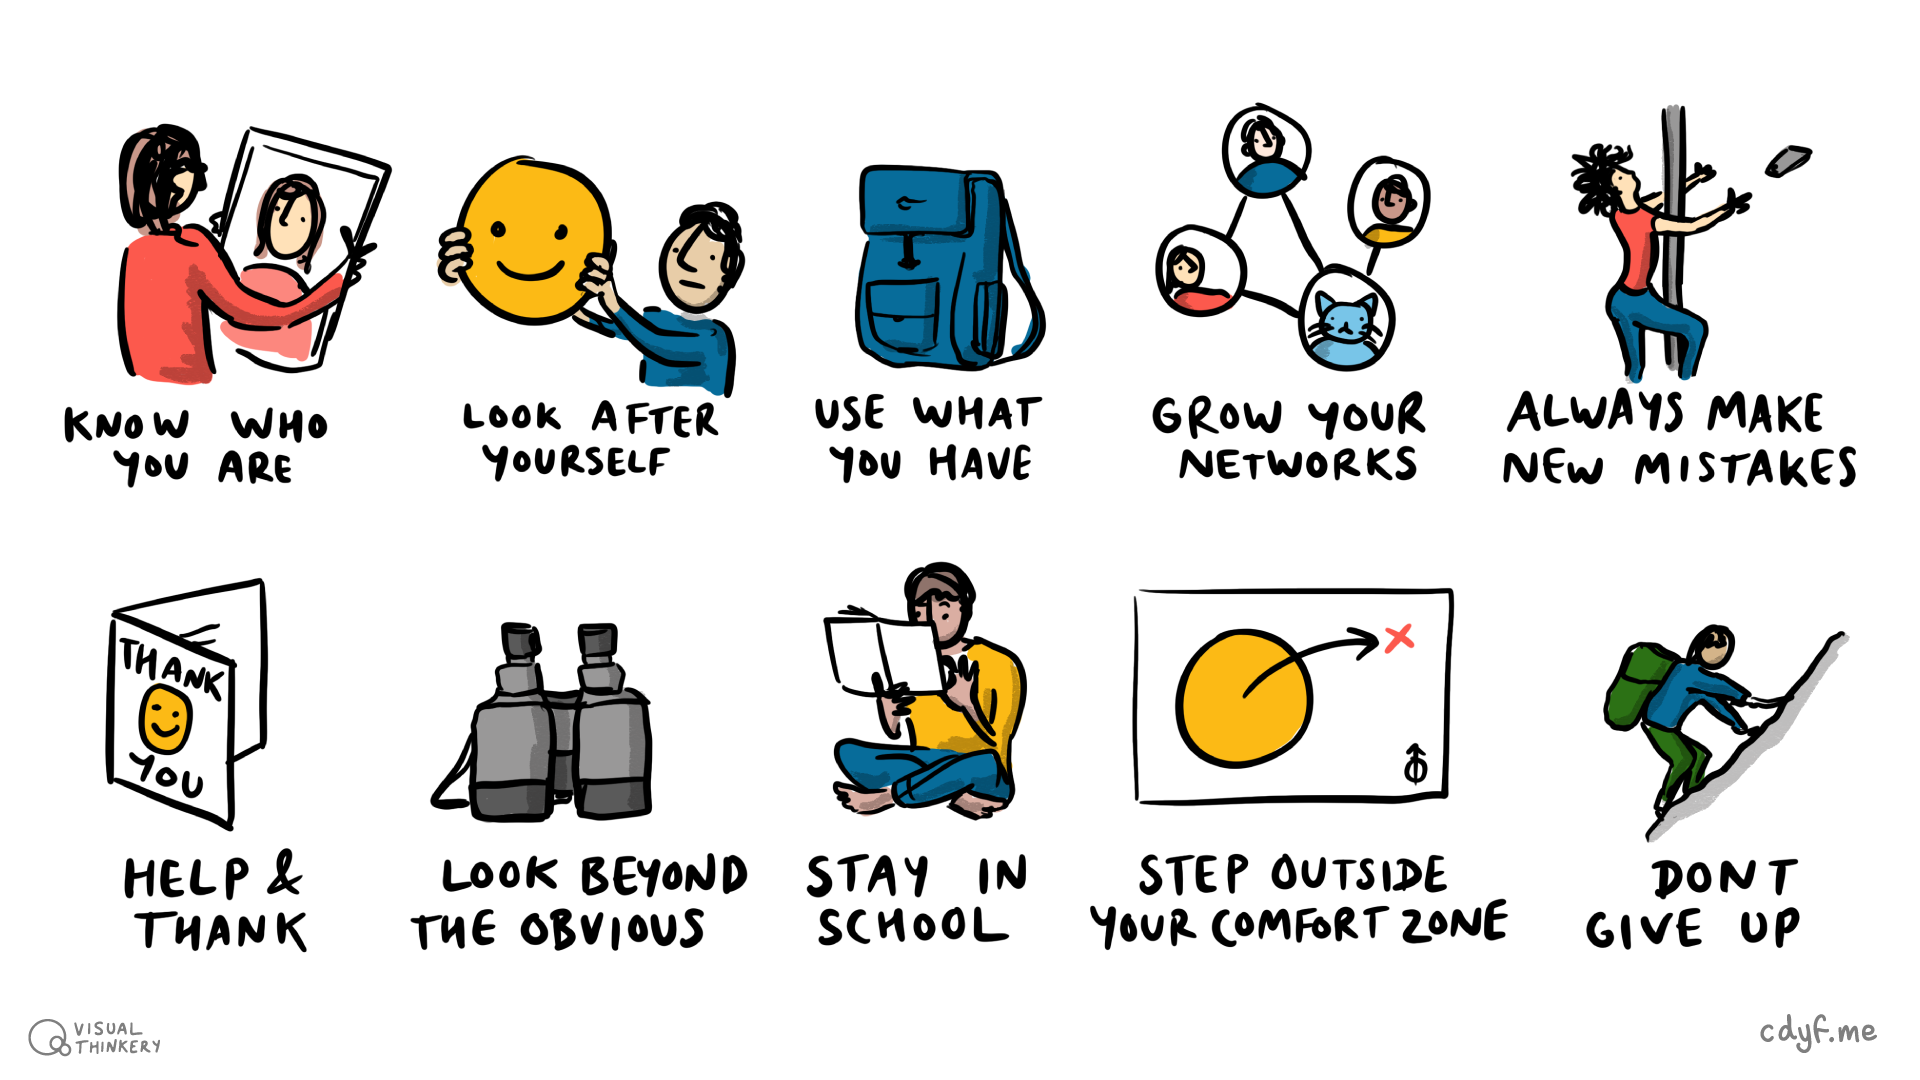 Ten Simple rules for coding your future. Know who you are, look after yourself, use what you have, grow your networks, always make new mistakes, help and thank, look beyond the obvious, stay in school, step outside your comfort zone and (most importantly) don’t give up! Figure by Visual Thinkery is licensed under CC-BY-ND